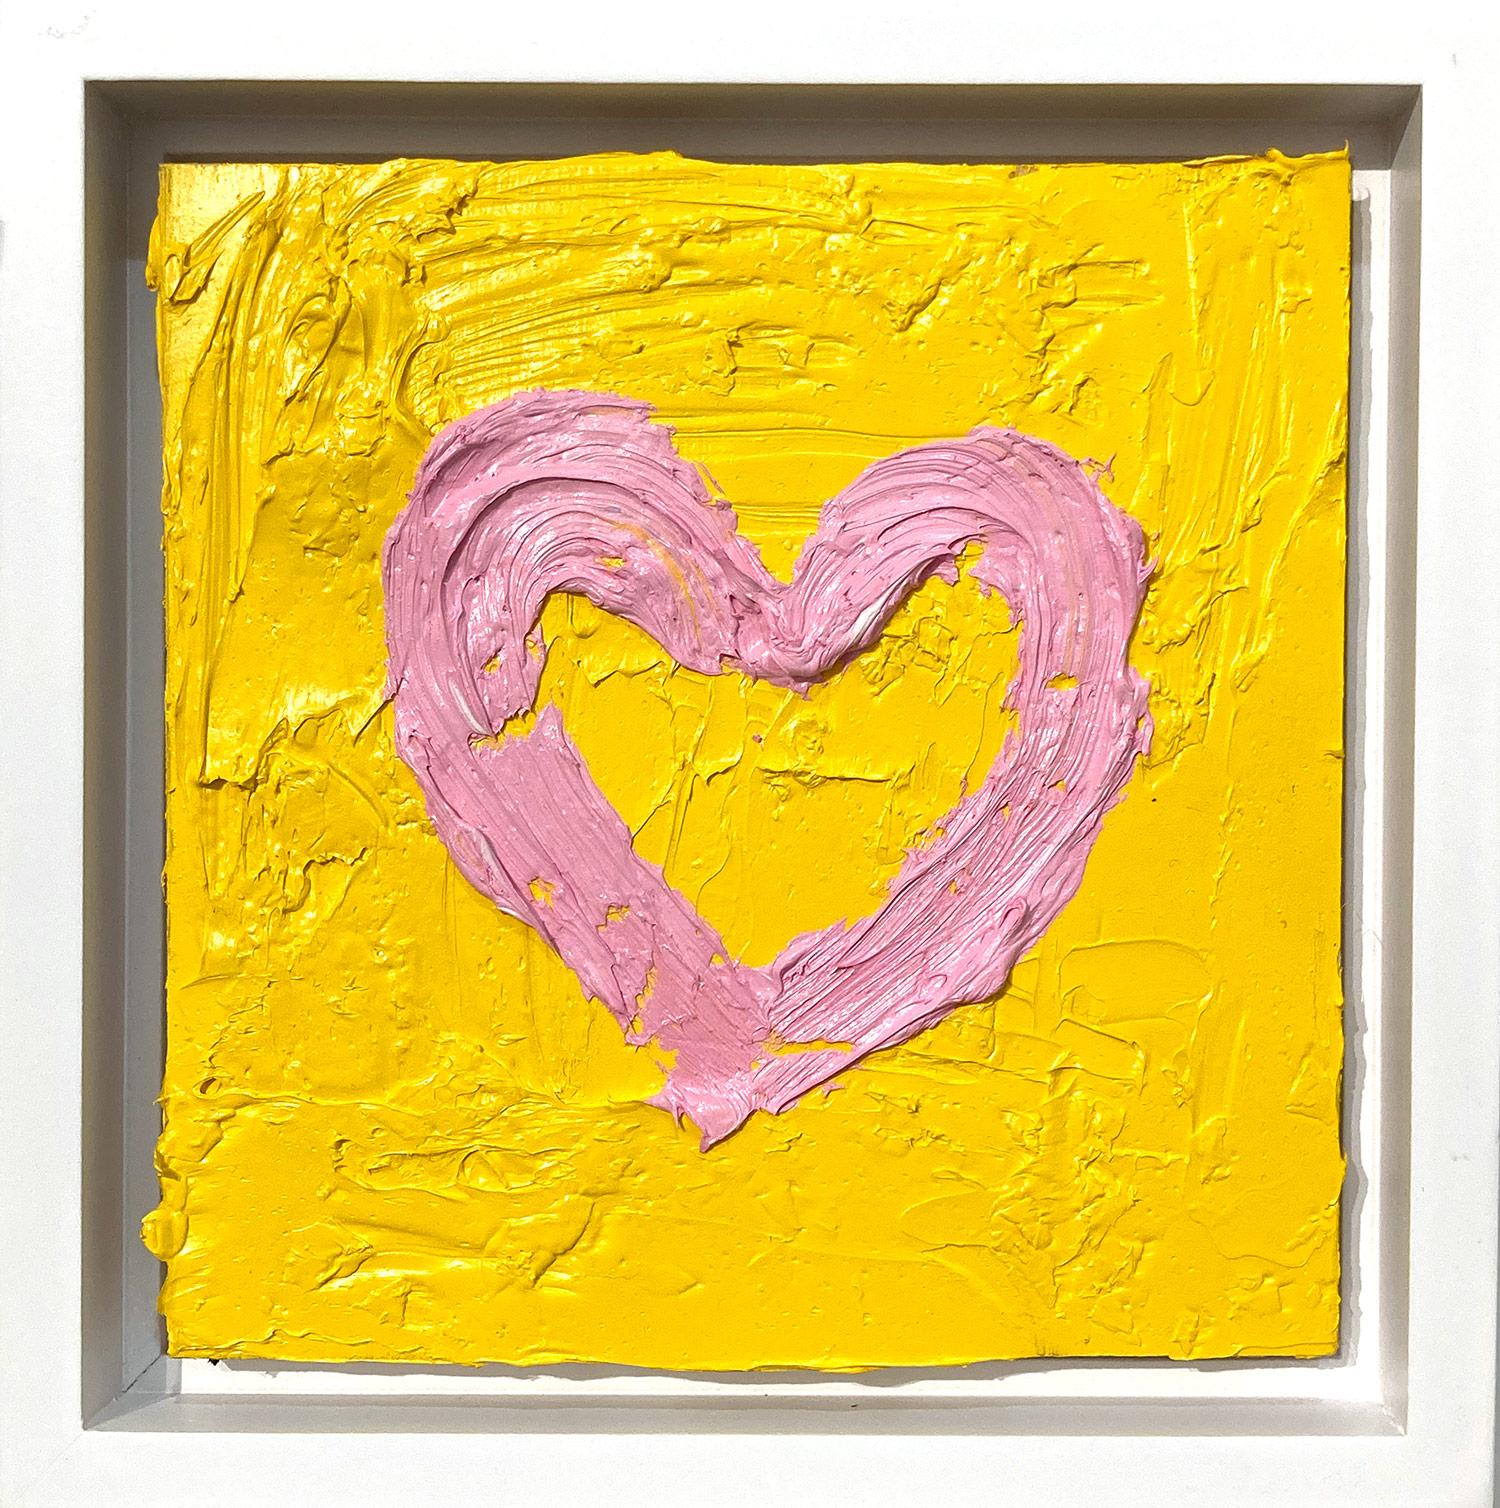 Cindy Shaoul Figurative Painting - "My Juicy Fruit Heart" Yellow and Pink Contemporary Oil Painting w Floater Frame